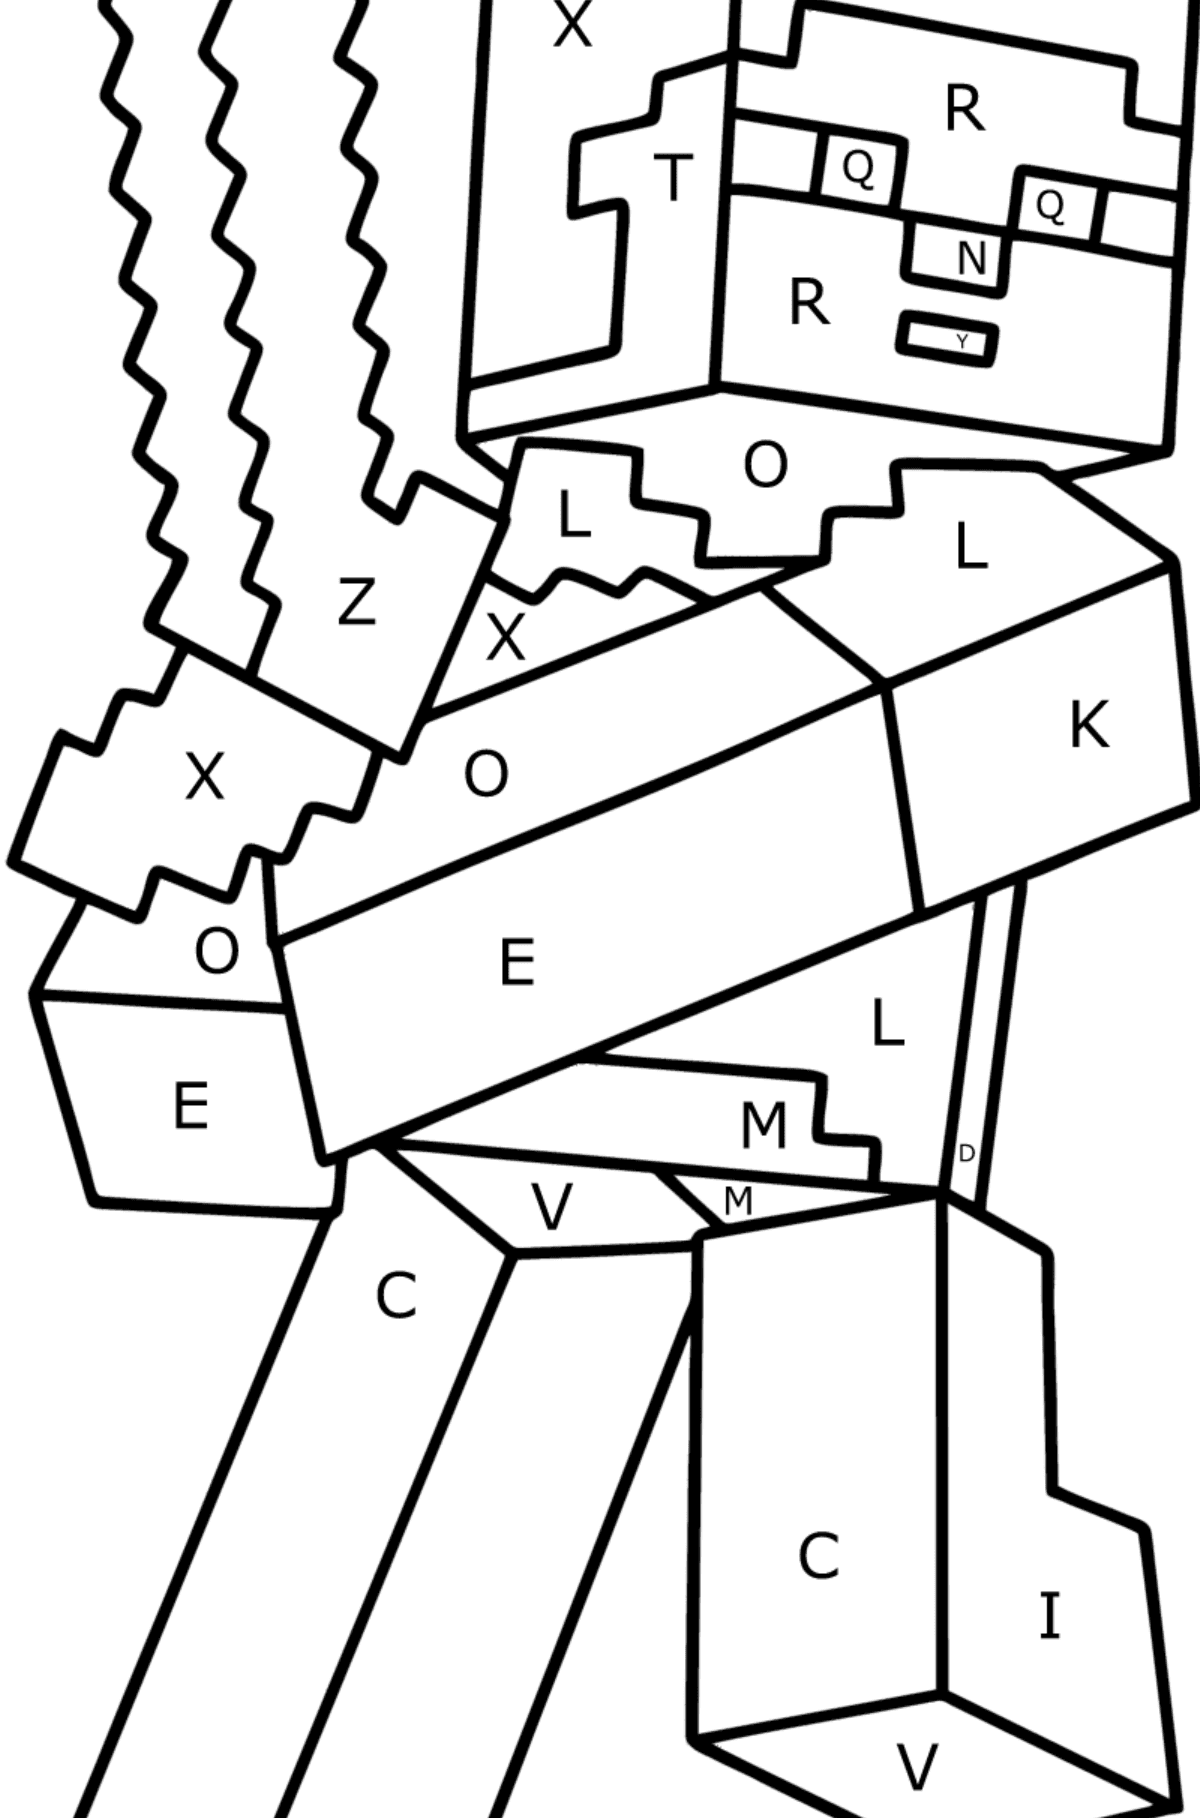 Minecraft Steve coloring page - Coloring by Letters for Kids